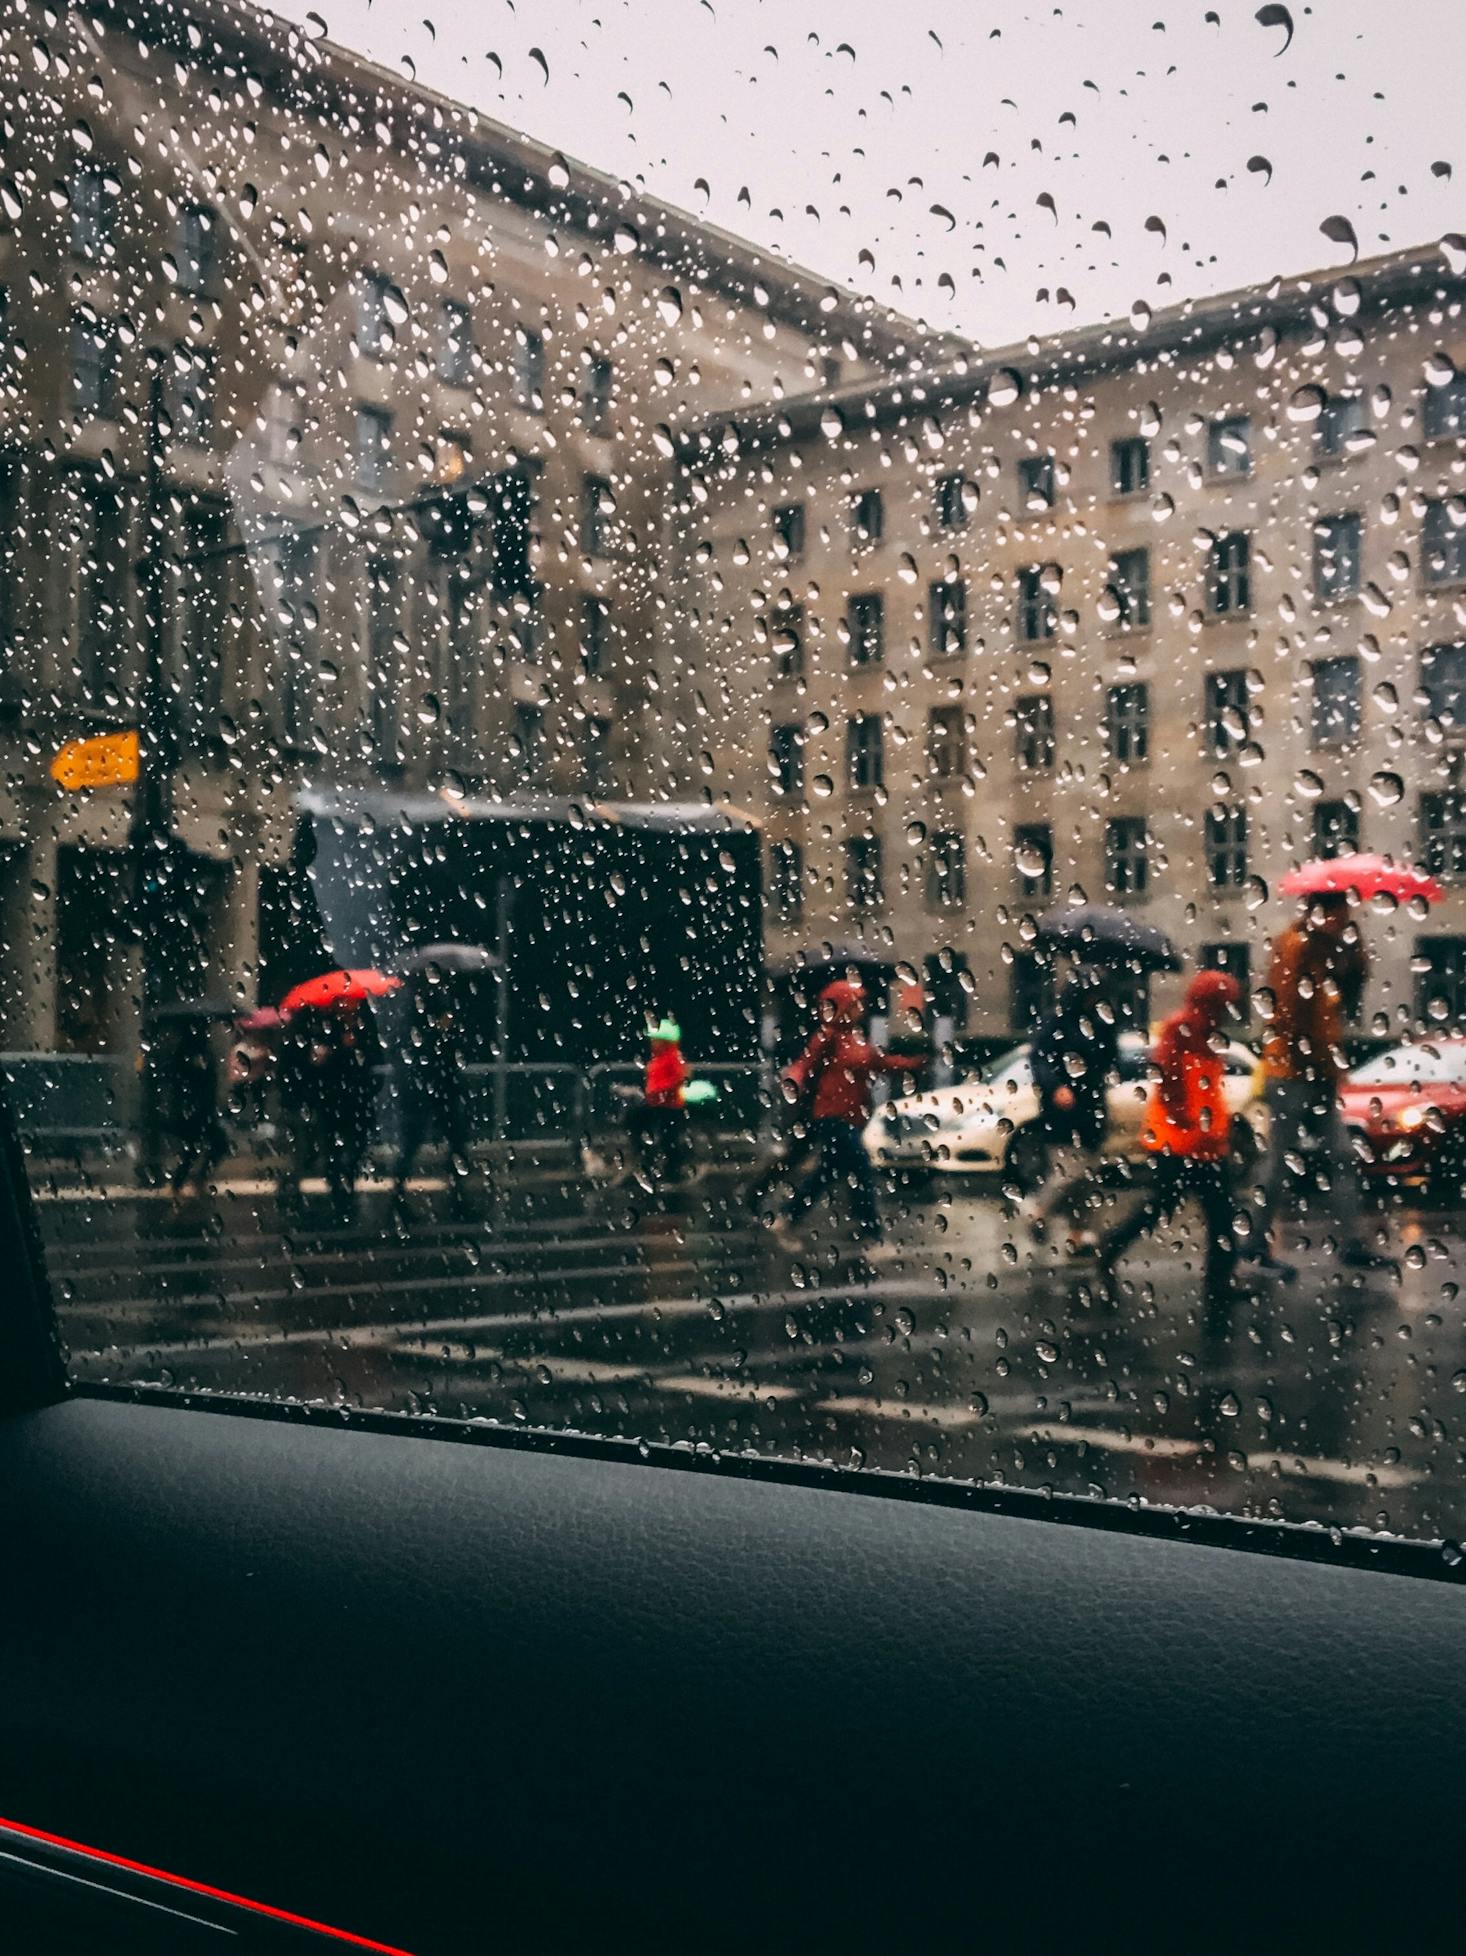 How to spend a rainy day in Berlin, Germany